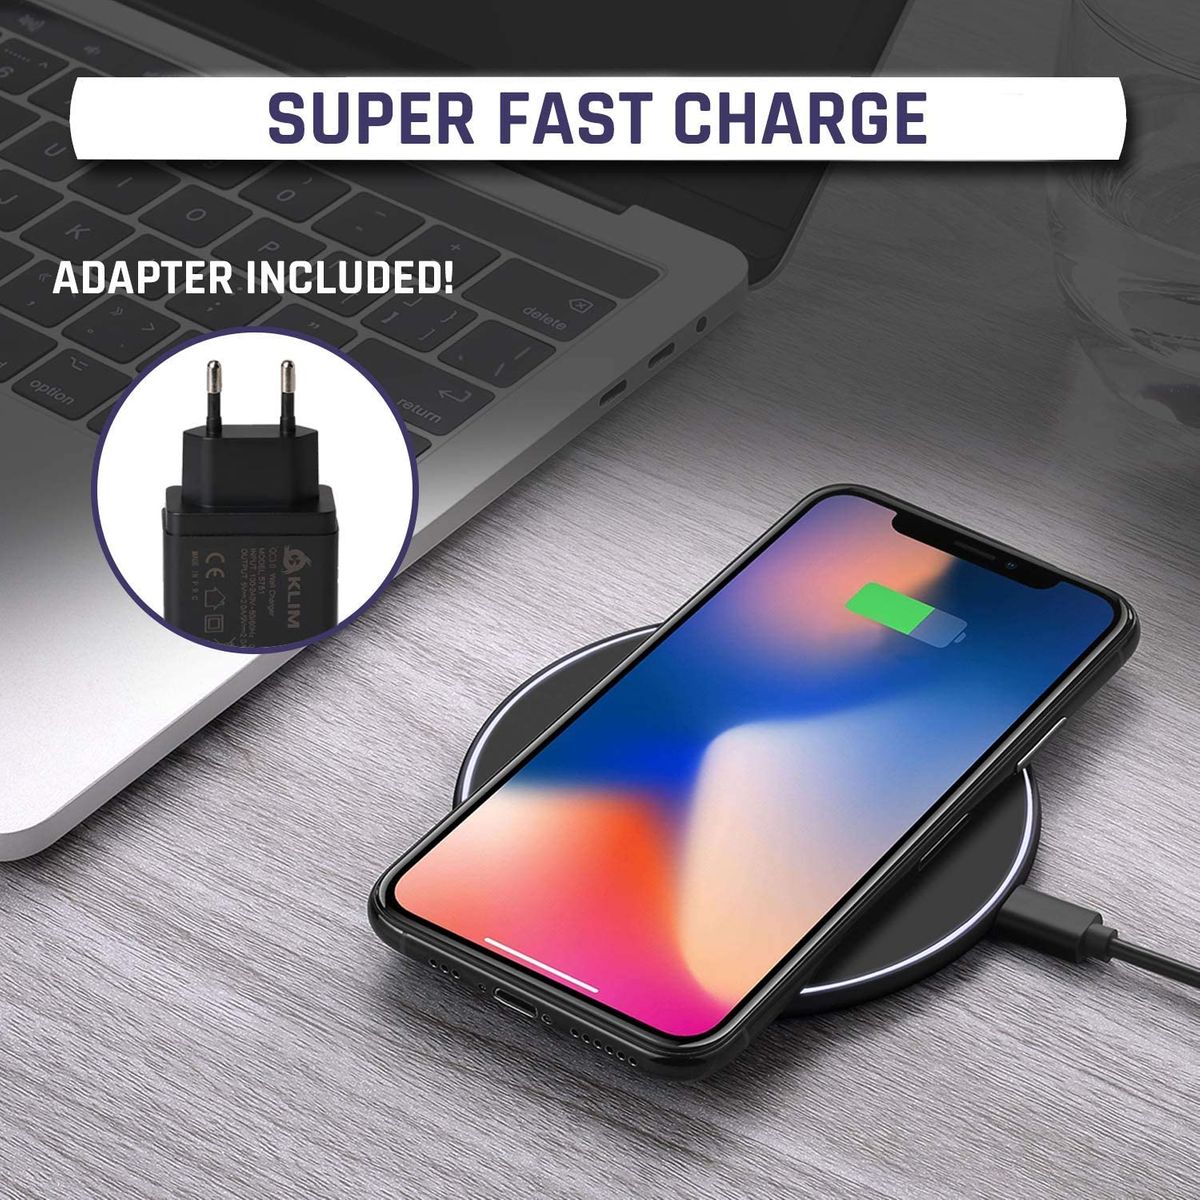 KLIM UFO Wireless Charging Pad with Adapter + 10 W Output + Wireless Charger Compatible with iPhone Samsung Huawei LG and More